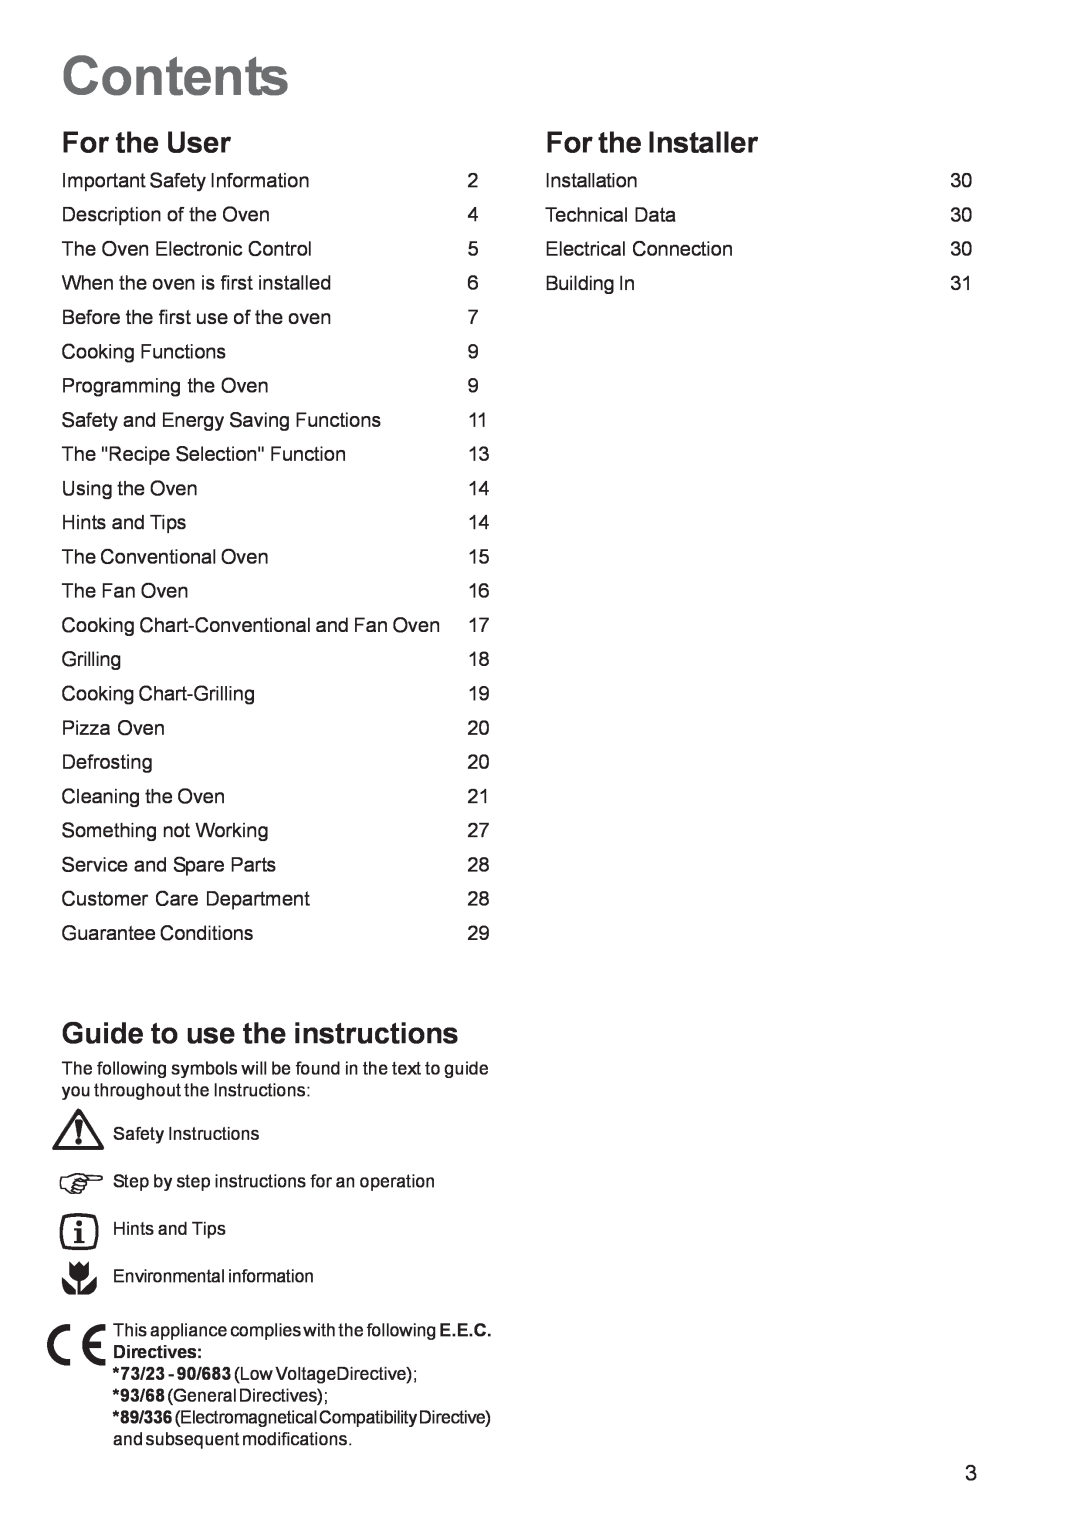 Zanussi ZBP 1165 manual Contents, For the User, For the Installer, Guide to use the instructions 